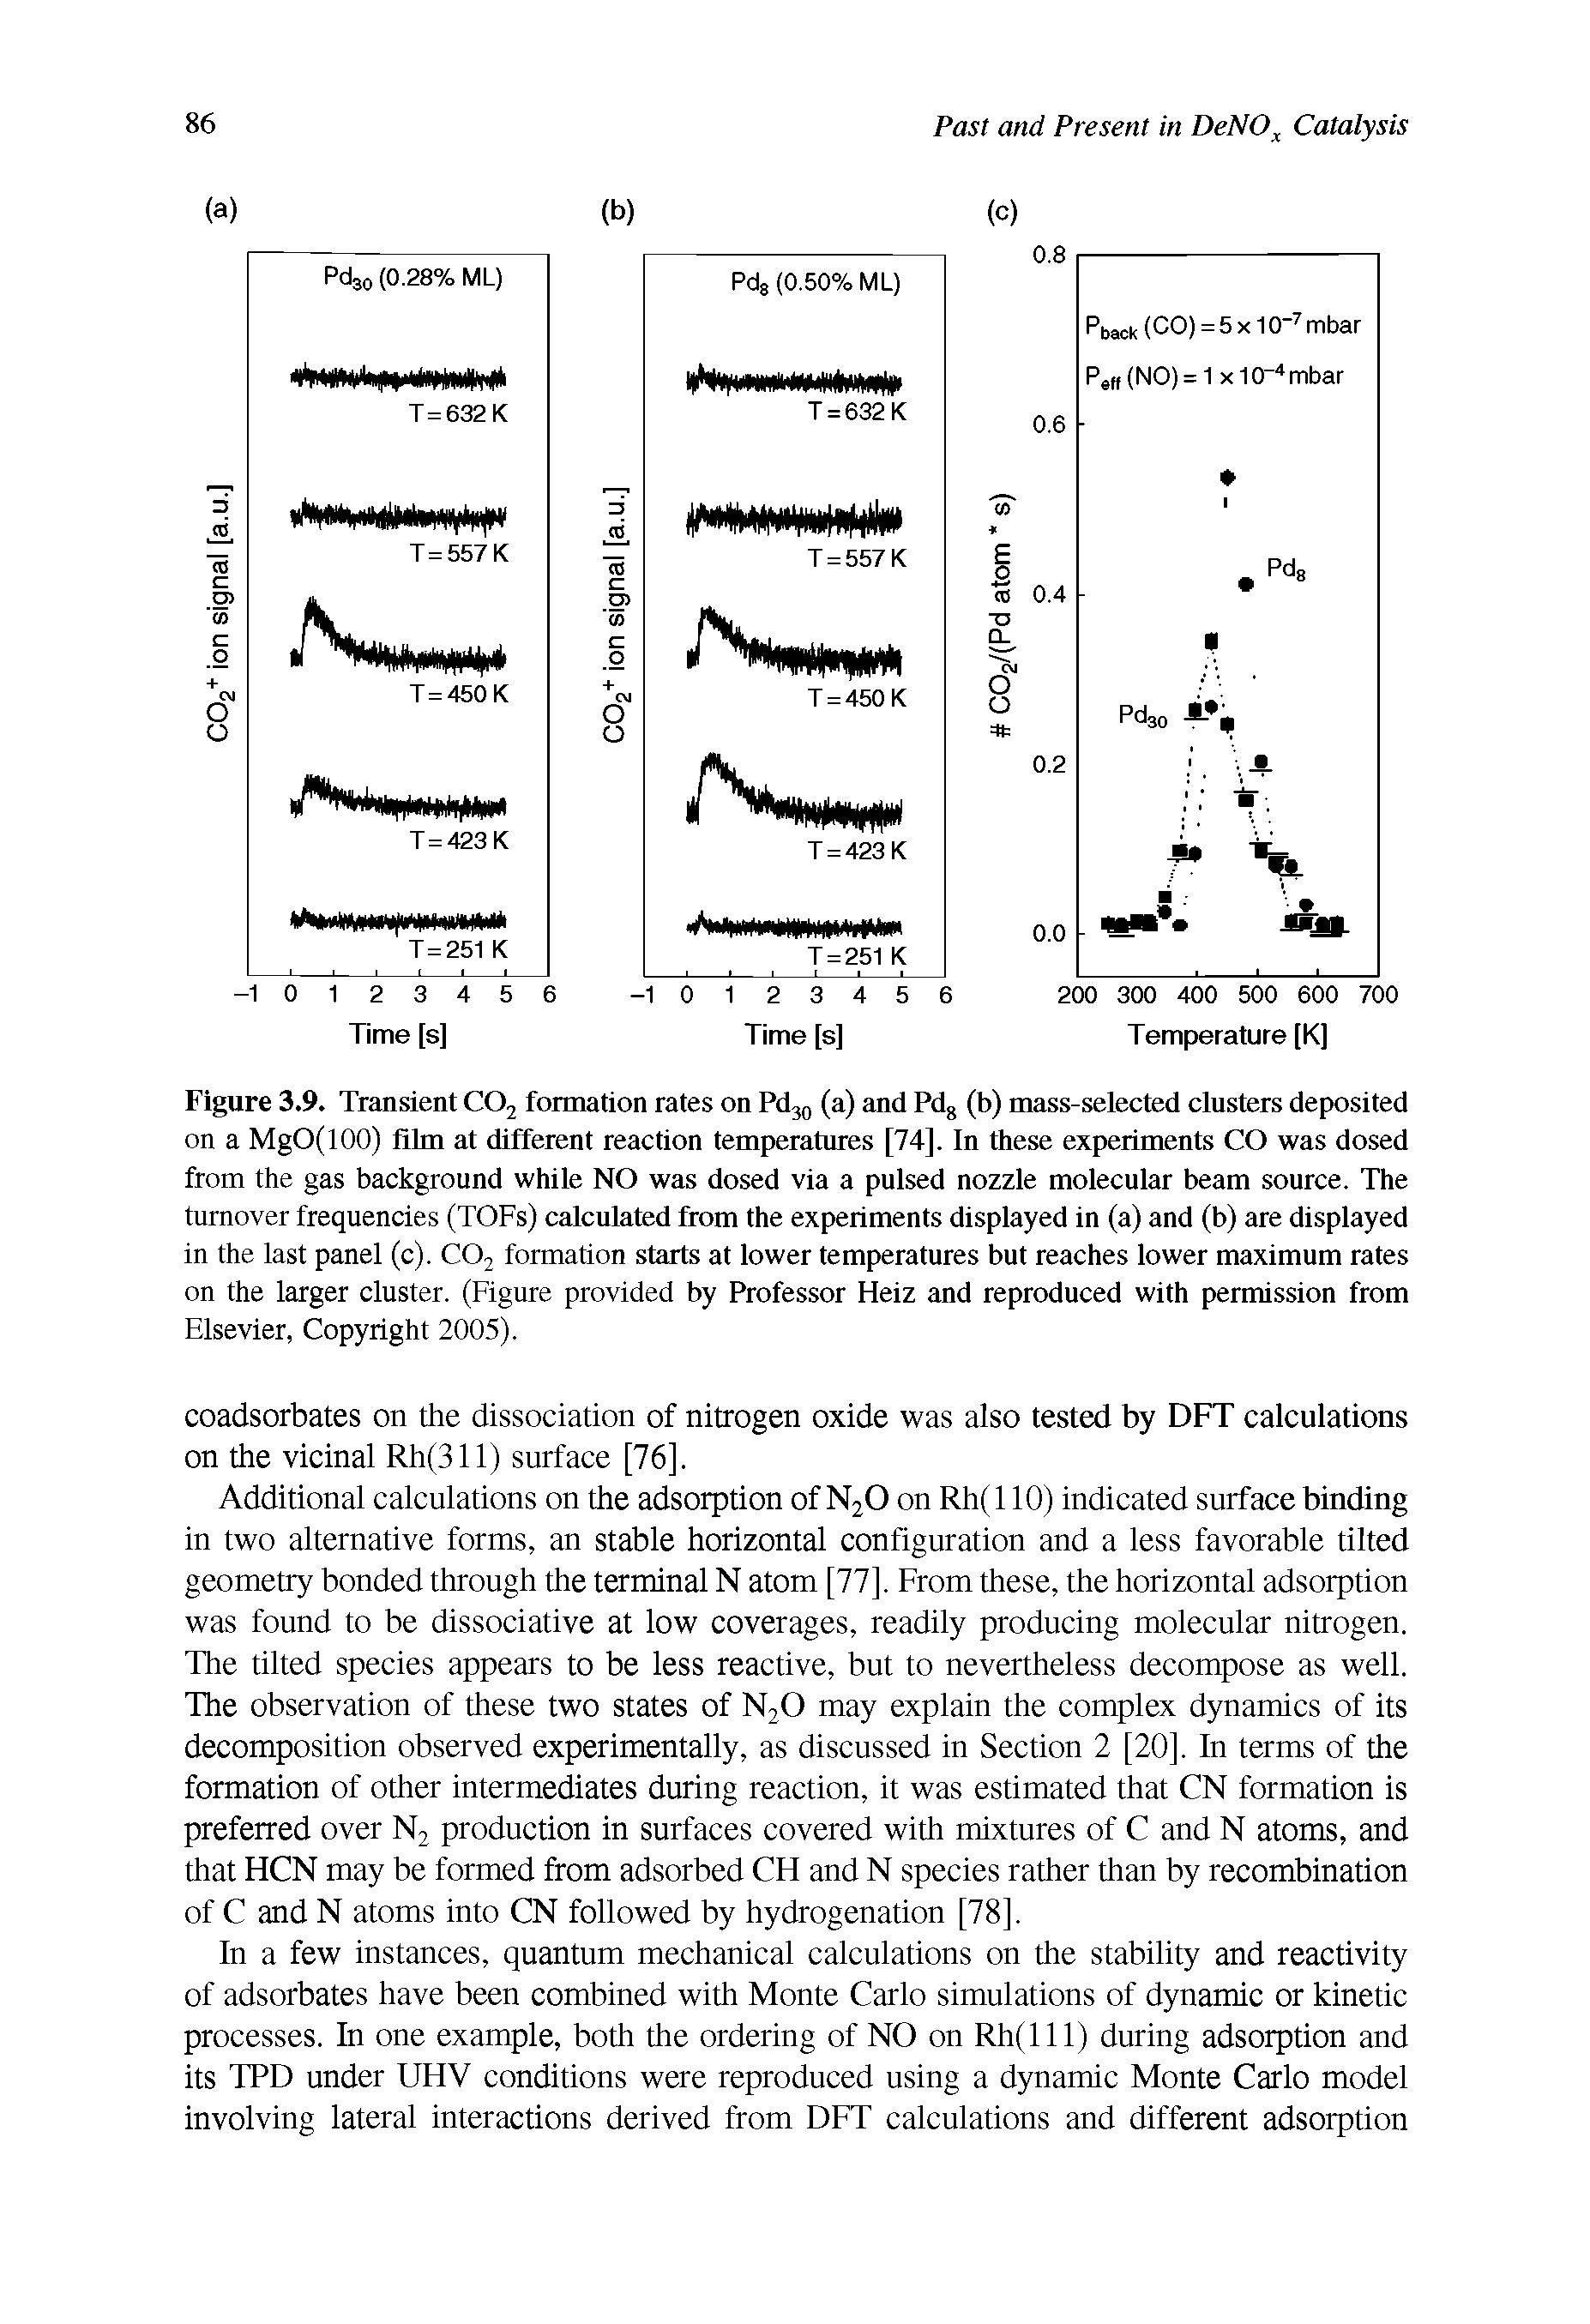 Figure 3.9. Transient C02 formation rates on Pd30 (a) and Pd8 (b) mass-selected clusters deposited on a MgO(lOO) film at different reaction temperatures [74]. In these experiments CO was dosed from the gas background while NO was dosed via a pulsed nozzle molecular beam source. The turnover frequencies (TOFs) calculated from the experiments displayed in (a) and (b) are displayed in the last panel (c). C02 formation starts at lower temperatures but reaches lower maximum rates on the larger cluster. (Figure provided by Professor Heiz and reproduced with permission from Elsevier, Copyright 2005).